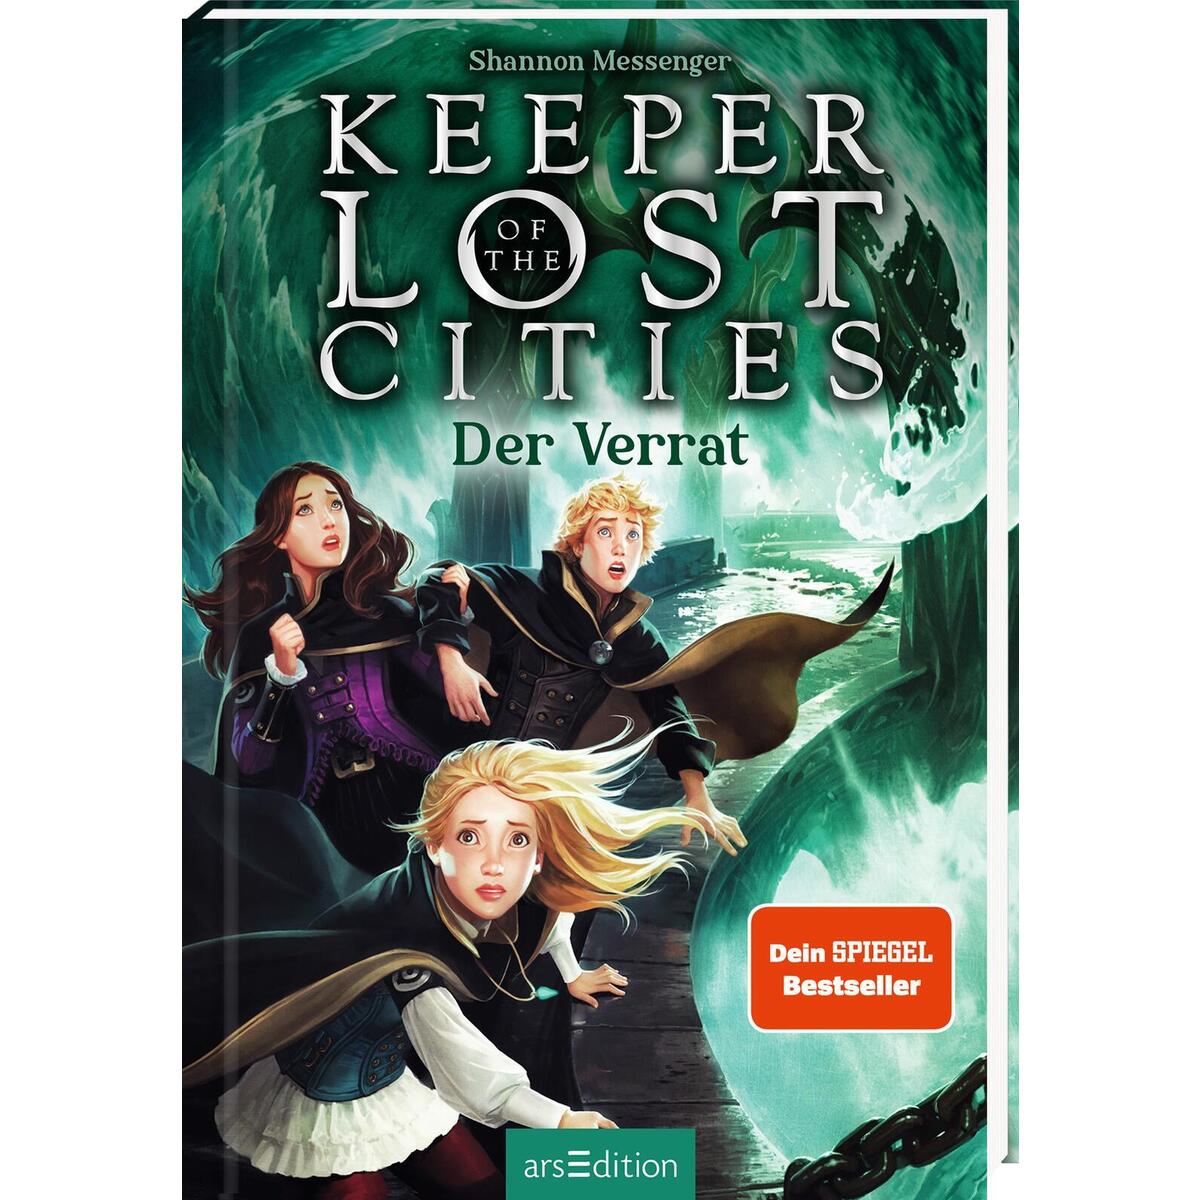 Keeper of the Lost Cities - Der Verrat (Keeper of the Lost Cities 4) von Ars Edition GmbH